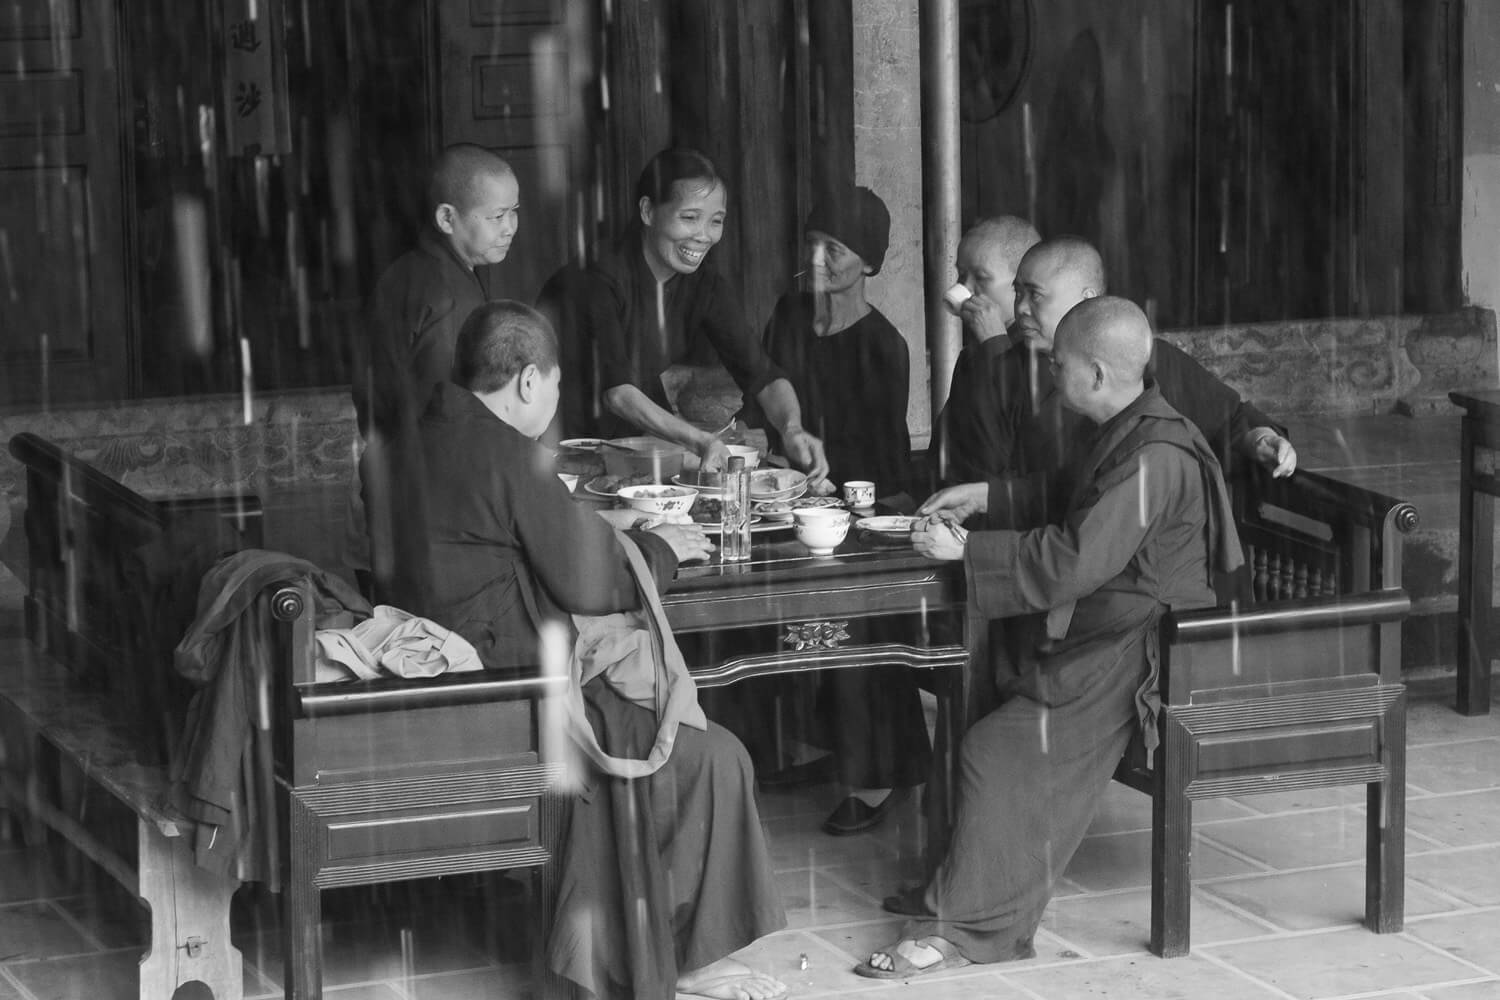 A group of Buddhist monks in traditional attire is seated around a wooden table, sharing a meal in a serene, open-air setting that appears to be within a temple's confines, as seen through the grayscale filter, adding a timeless quality to the moment.